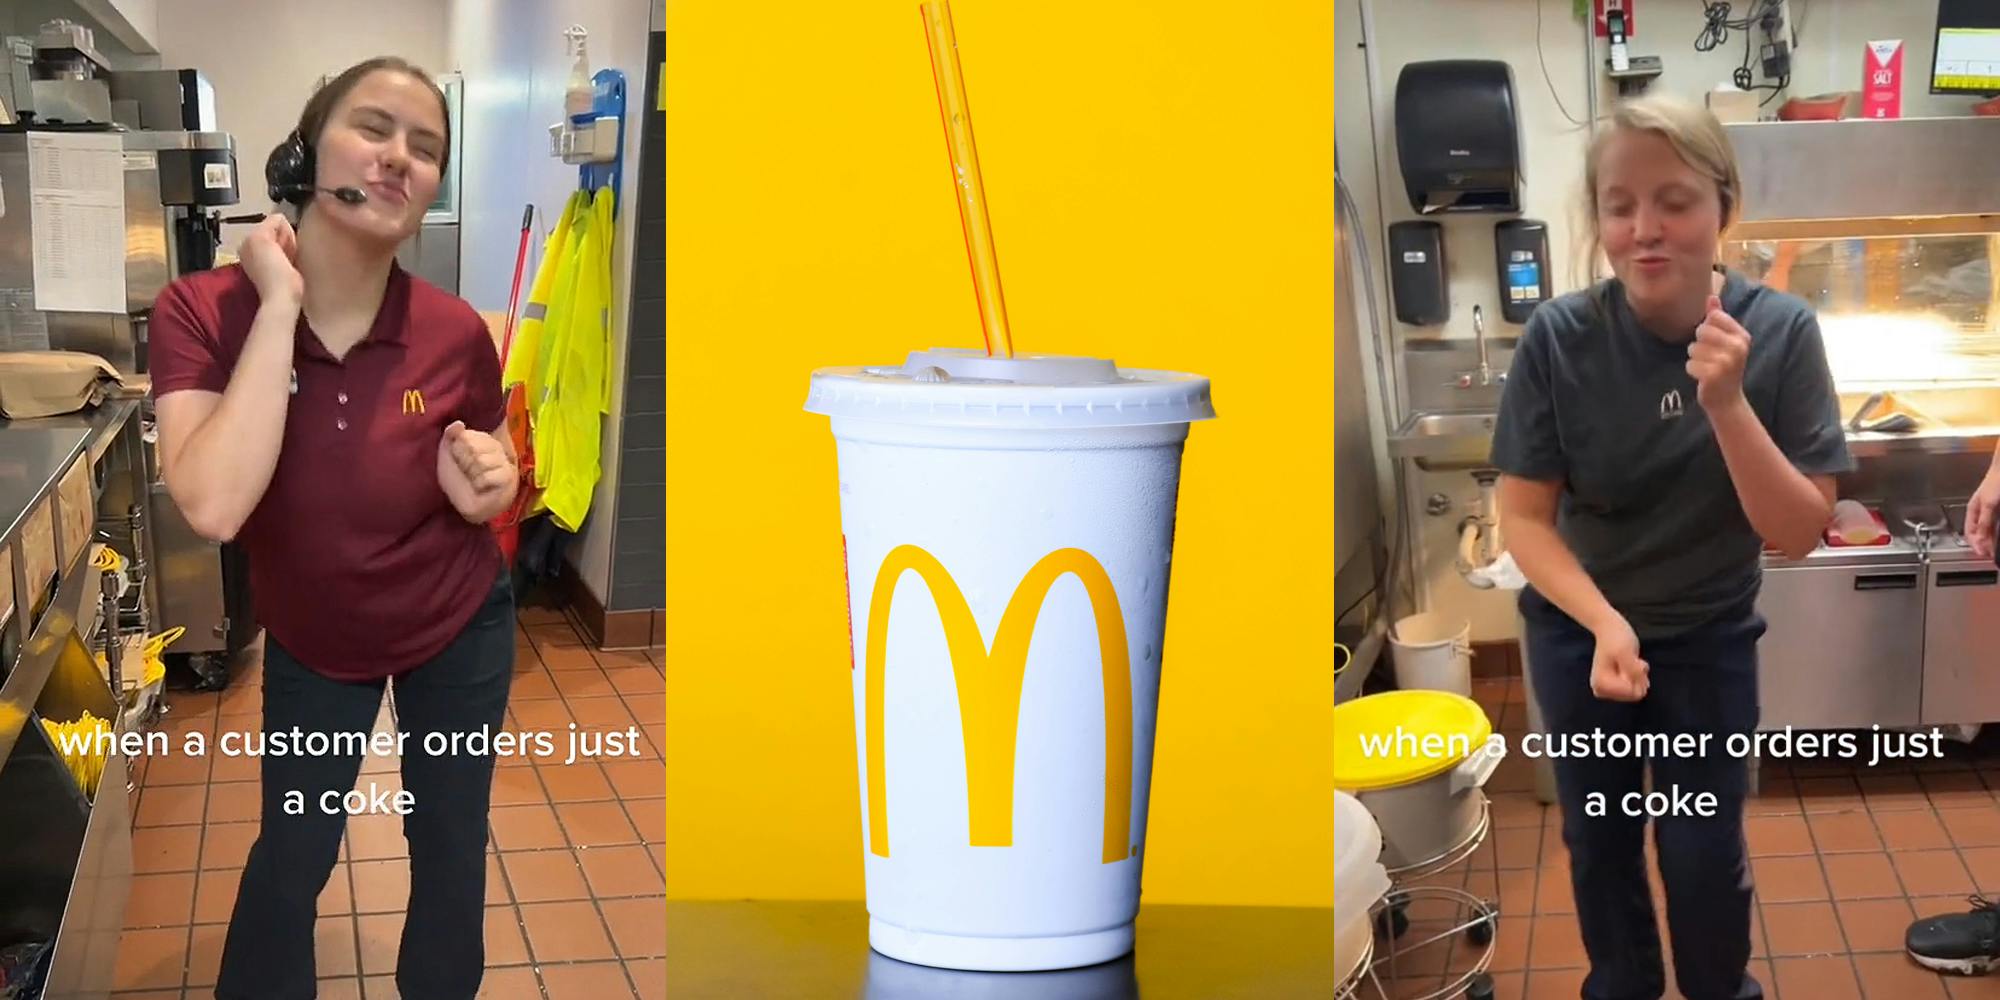 McDonald's worker dancing caption "when a customer orders just a coke" (l) McDonald's drink on yellow background (c) McDonald's worker dancing caption "when a customer orders just a coke" (r)